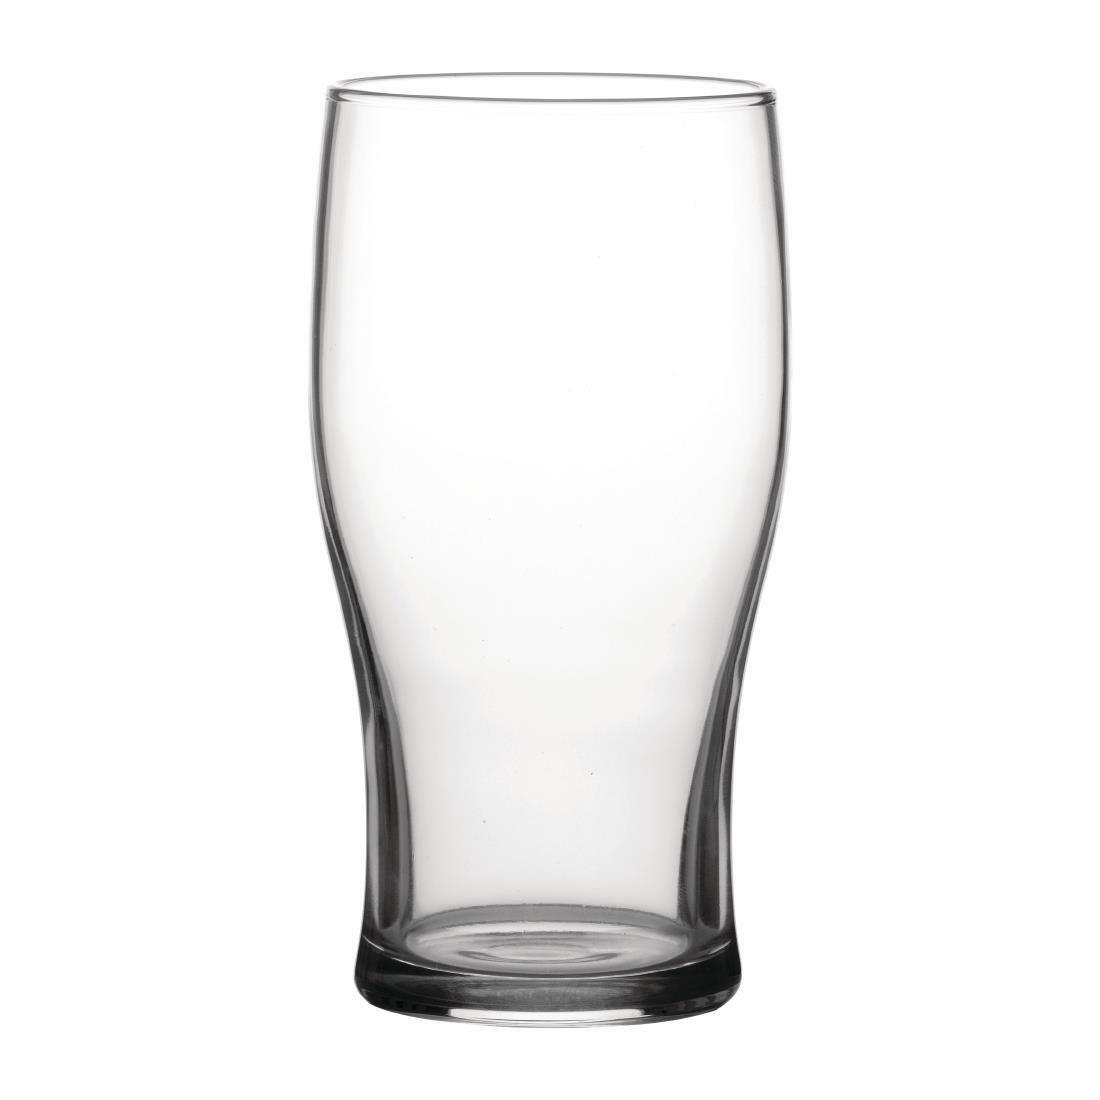 GC545 - G8563 - Arcoroc Ultimate Nucleated Beer Glasses 570ml (Pack of 24)  - GC545